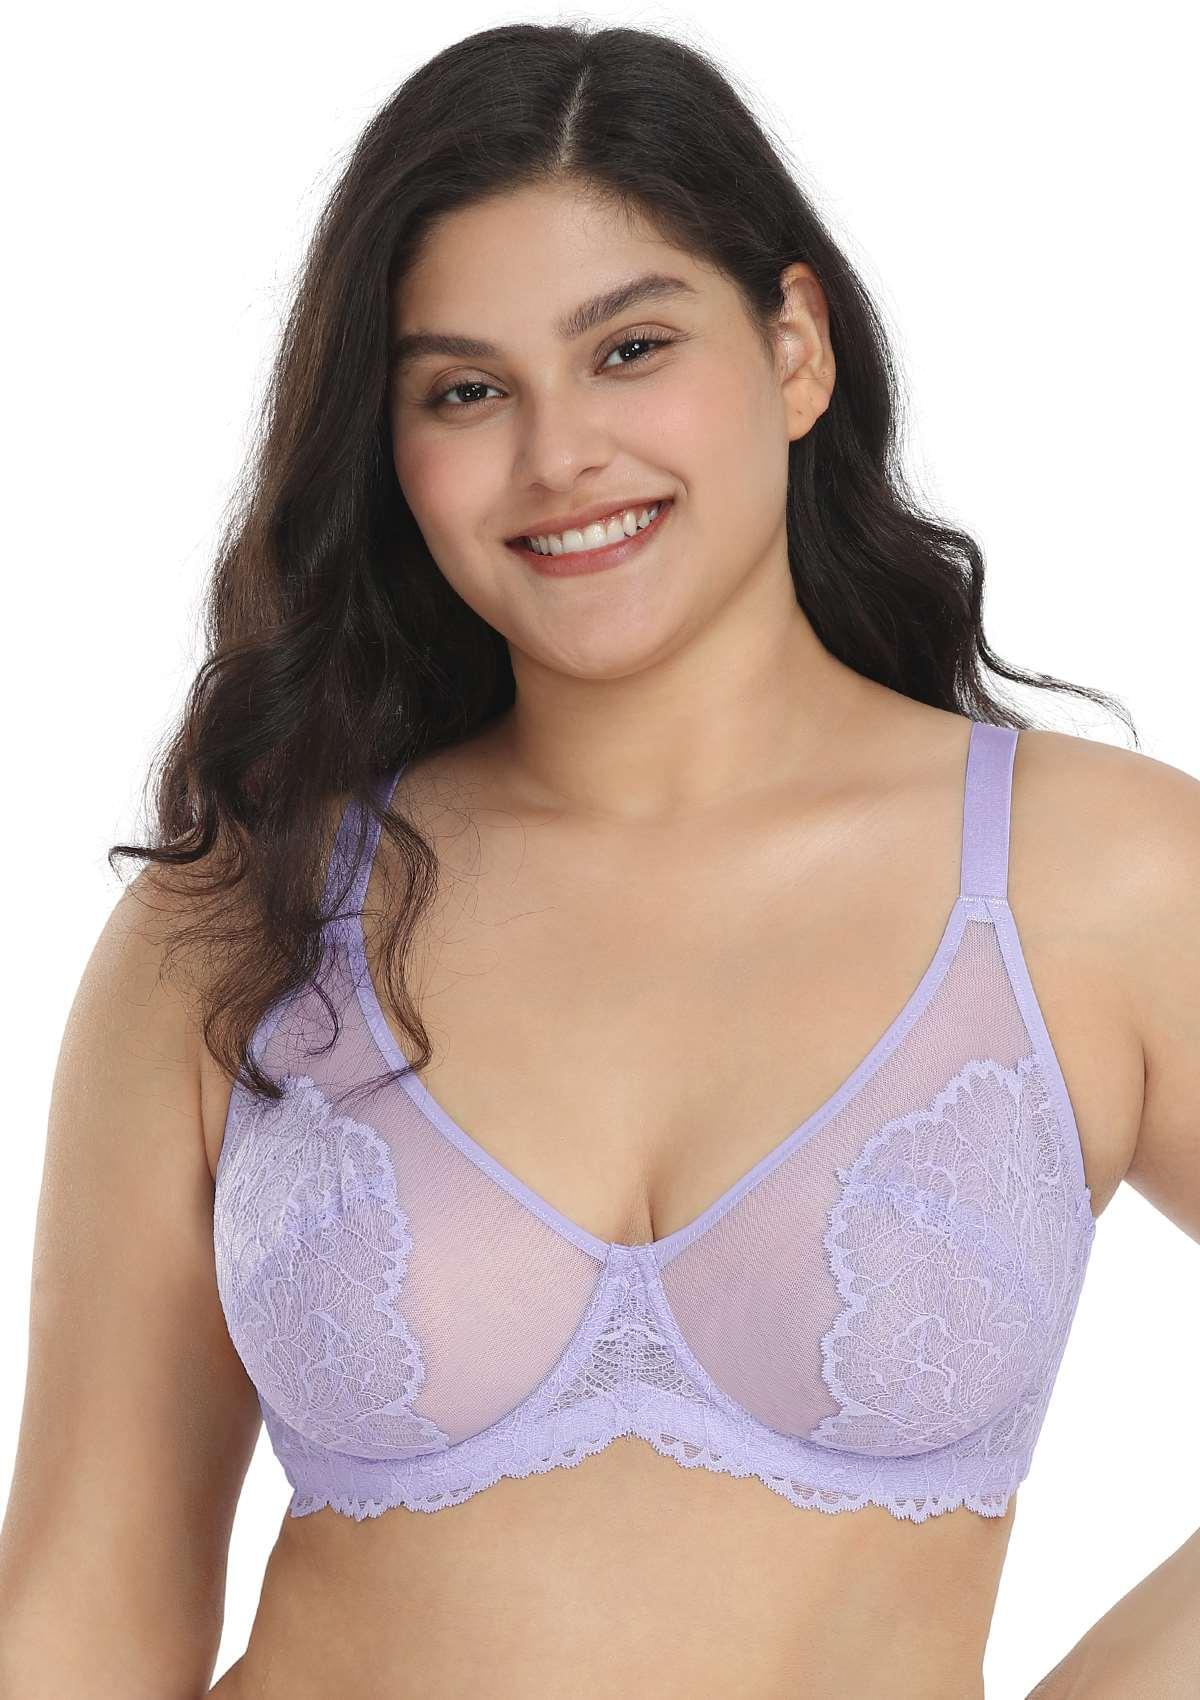 HSIA Blossom Transparent Lace Bra: Plus Size Wired Back Smoothing Bra - Light Purple / 42 / DD/E